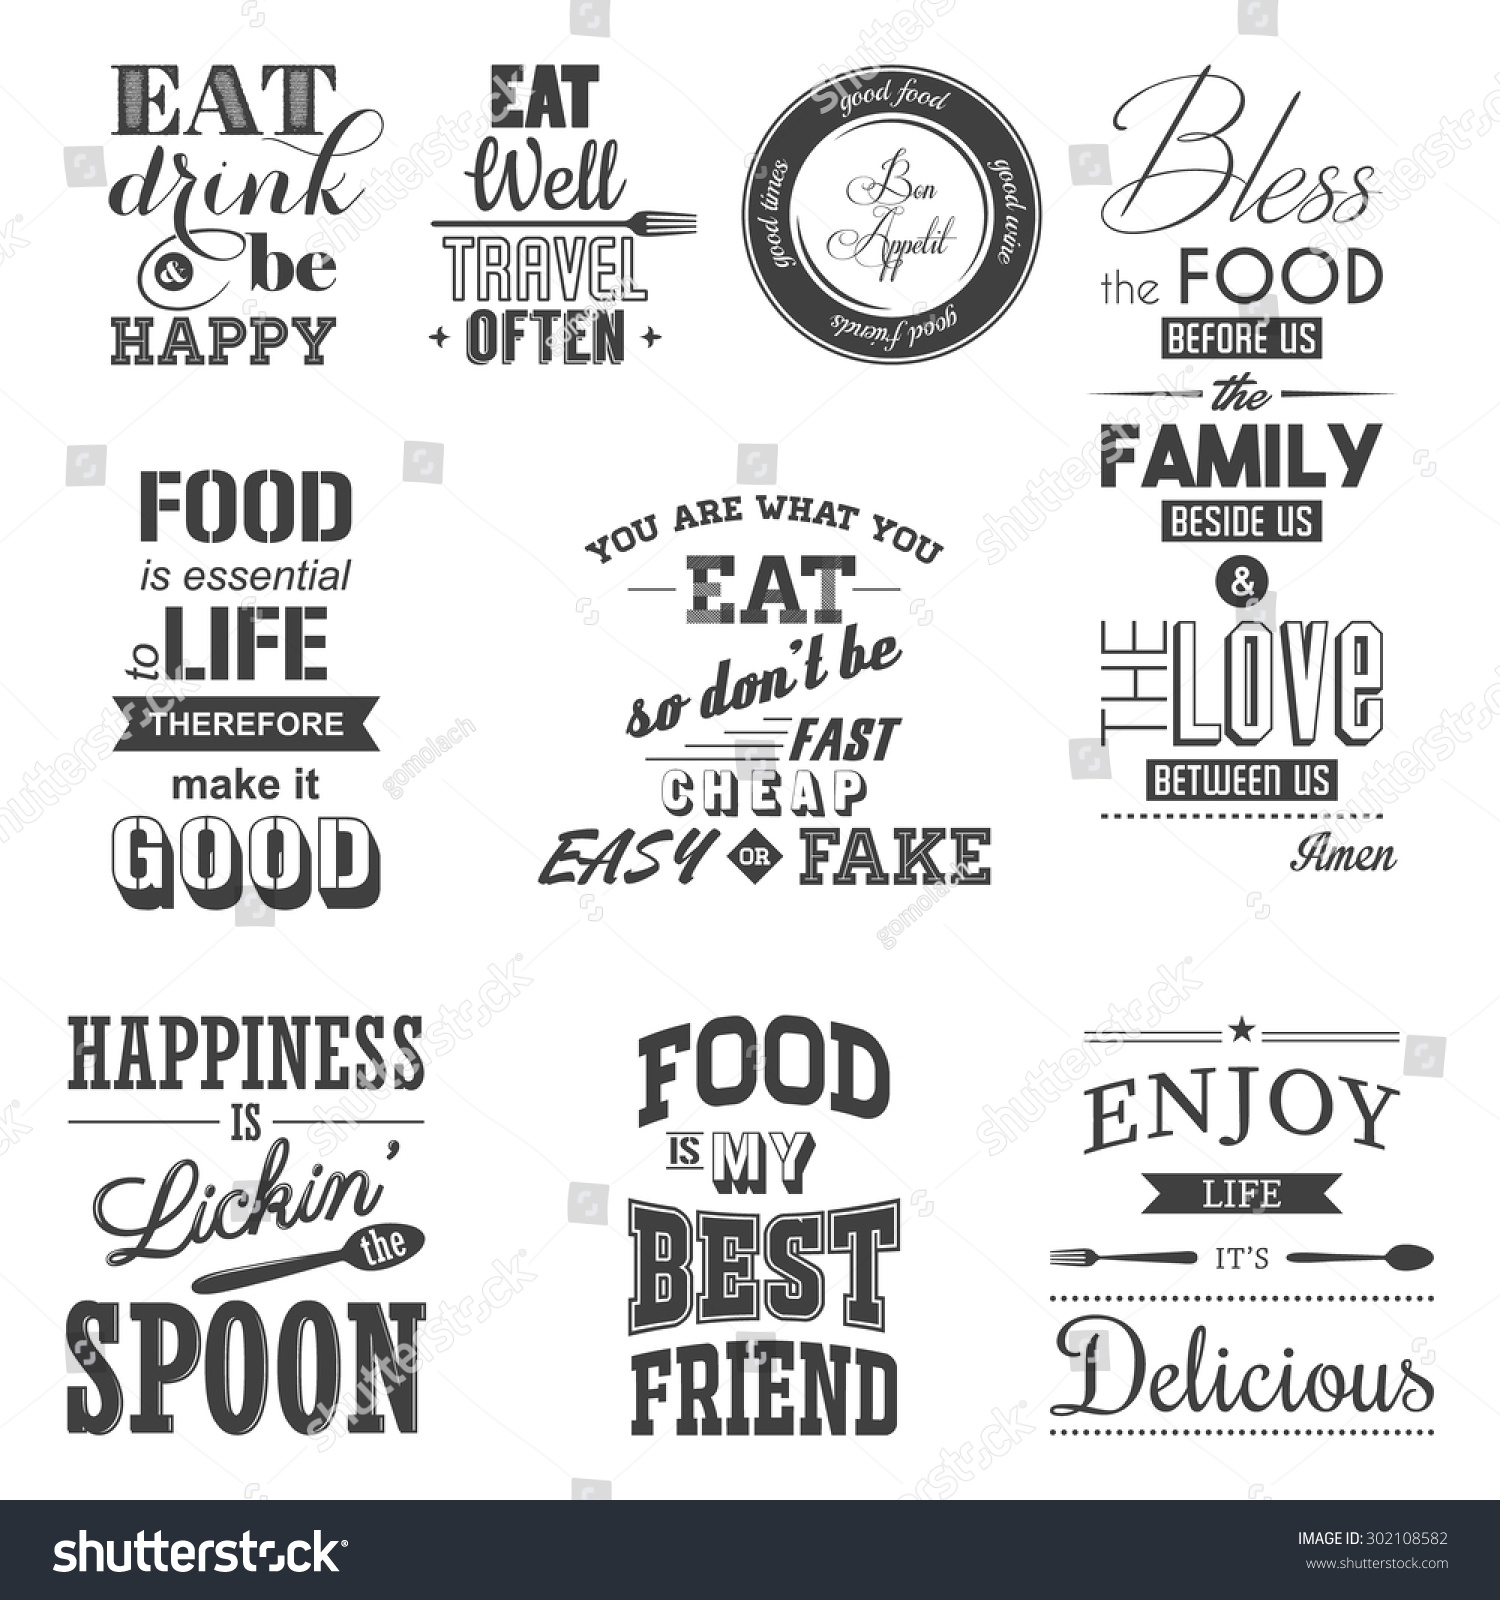 Set of vintage food typographic quotes Vector EPS8 illustration